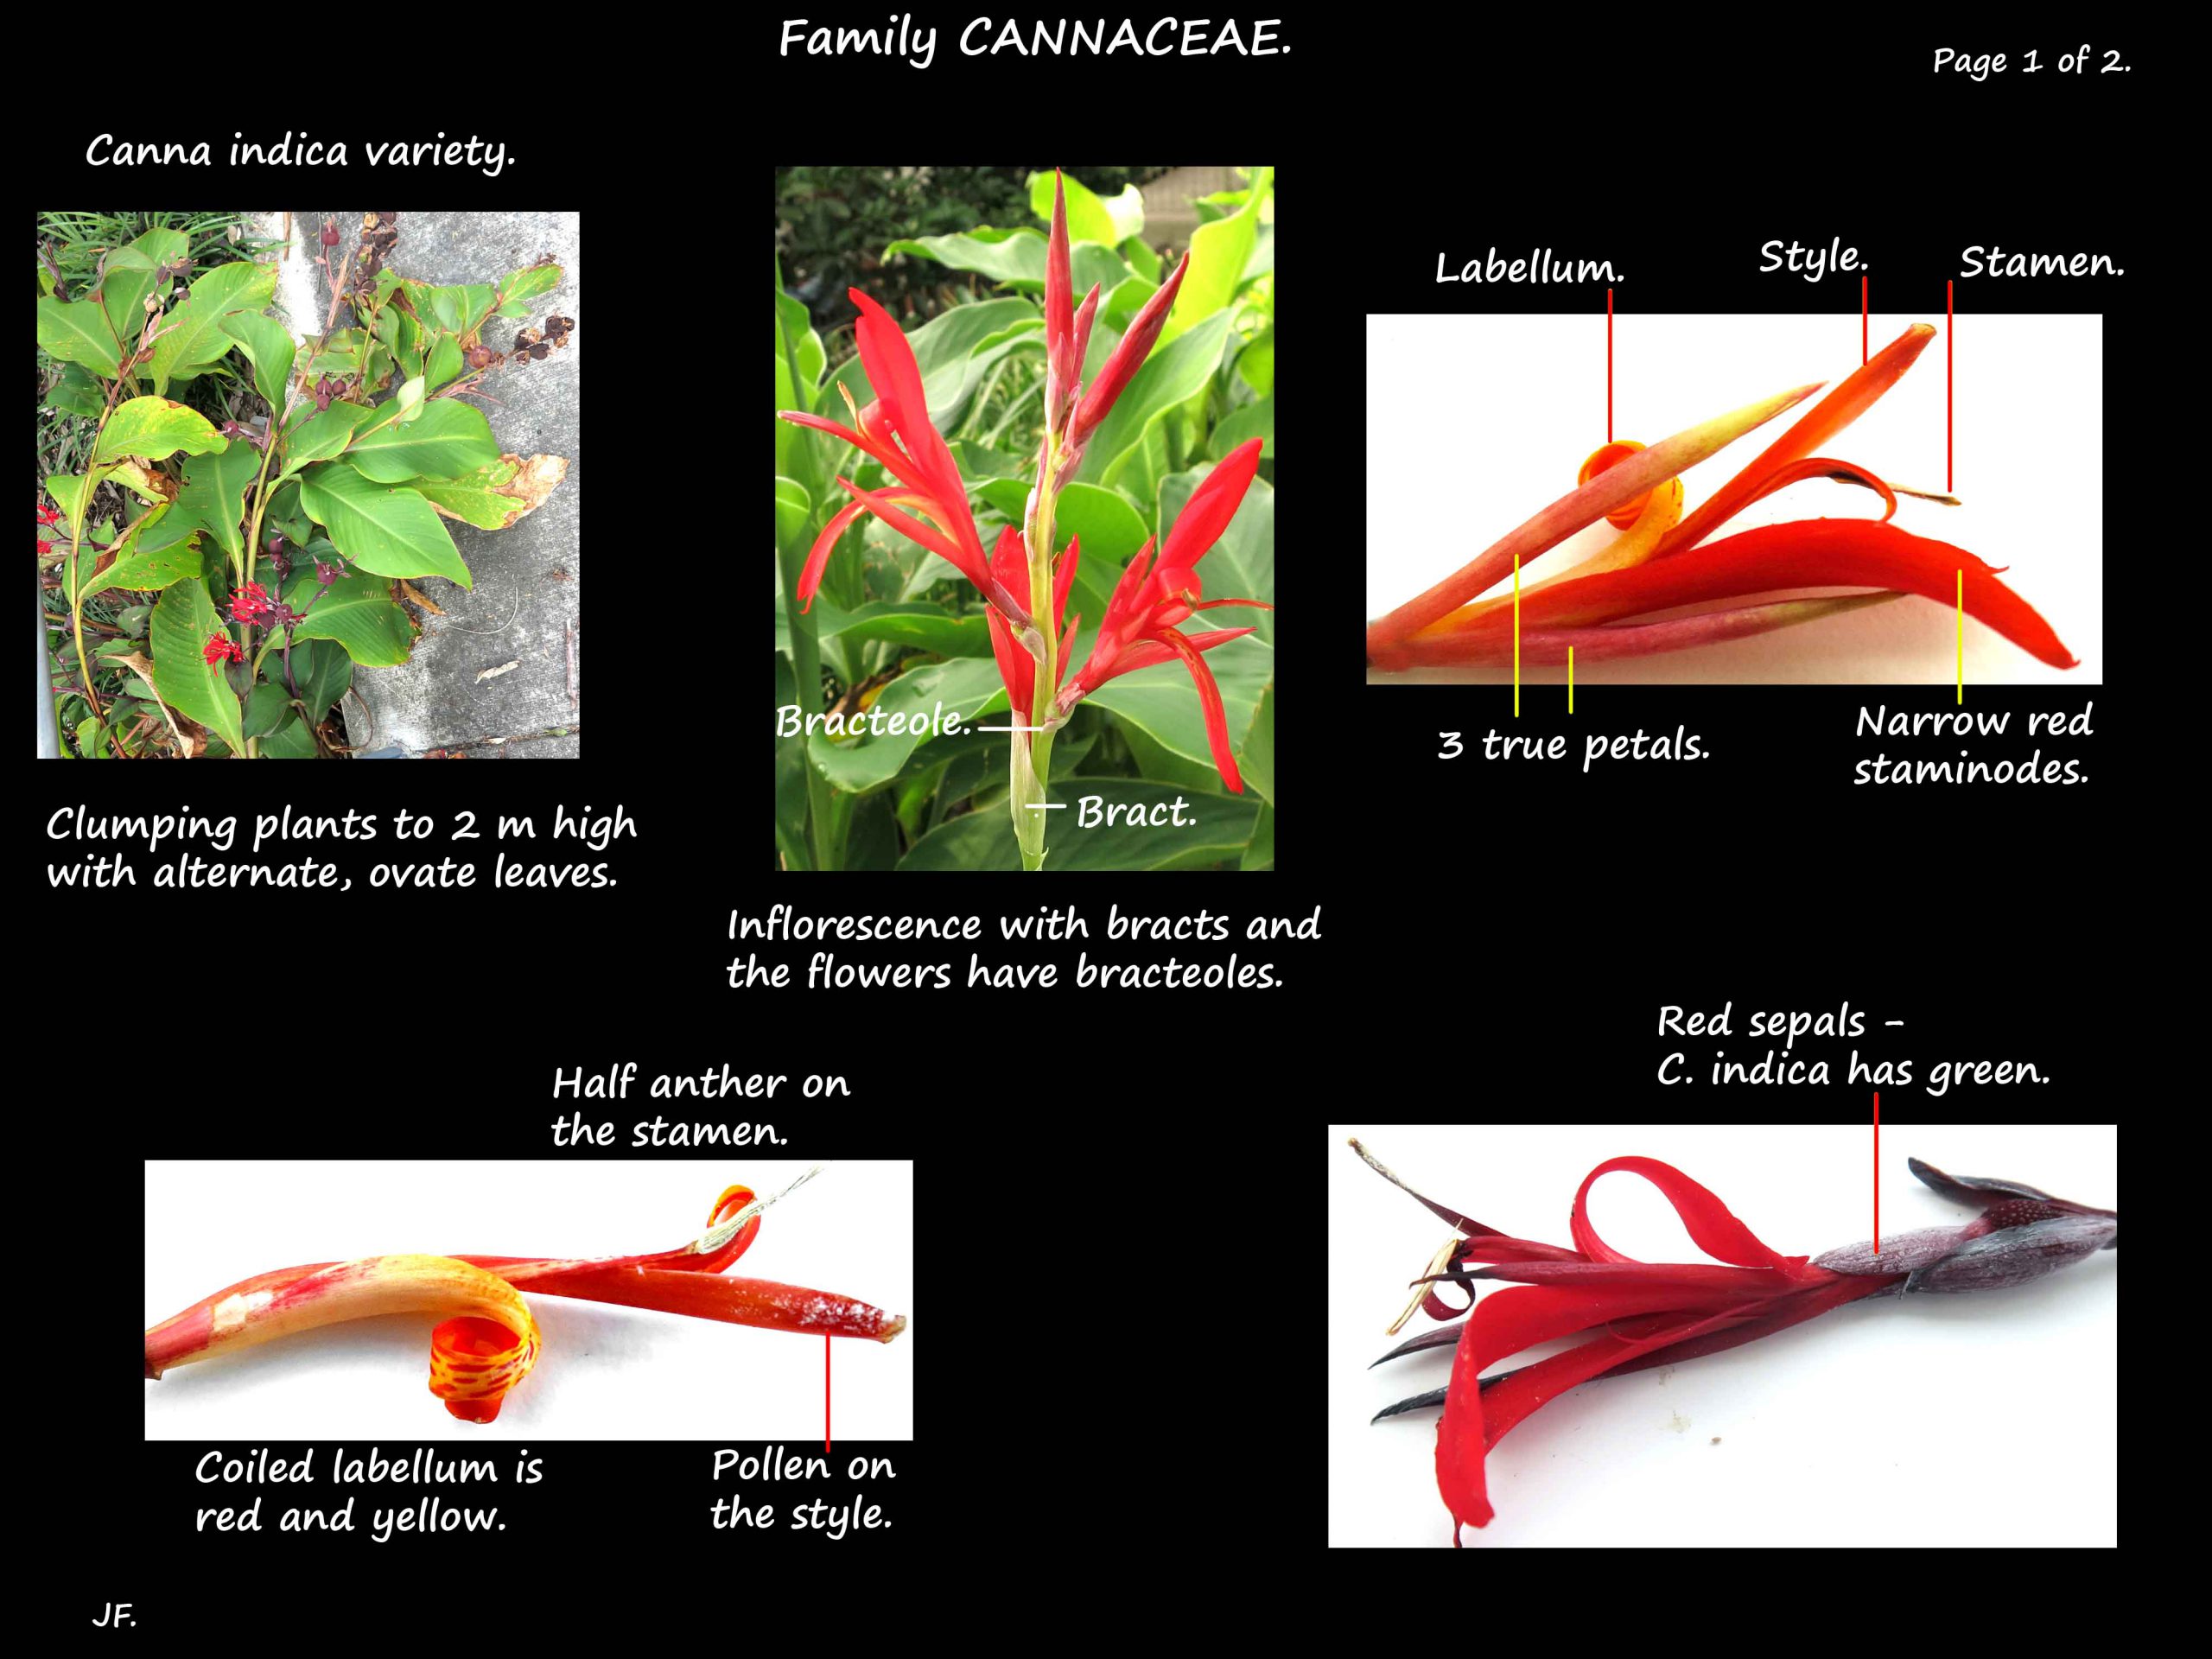 1 Canna indica leaves & flowers